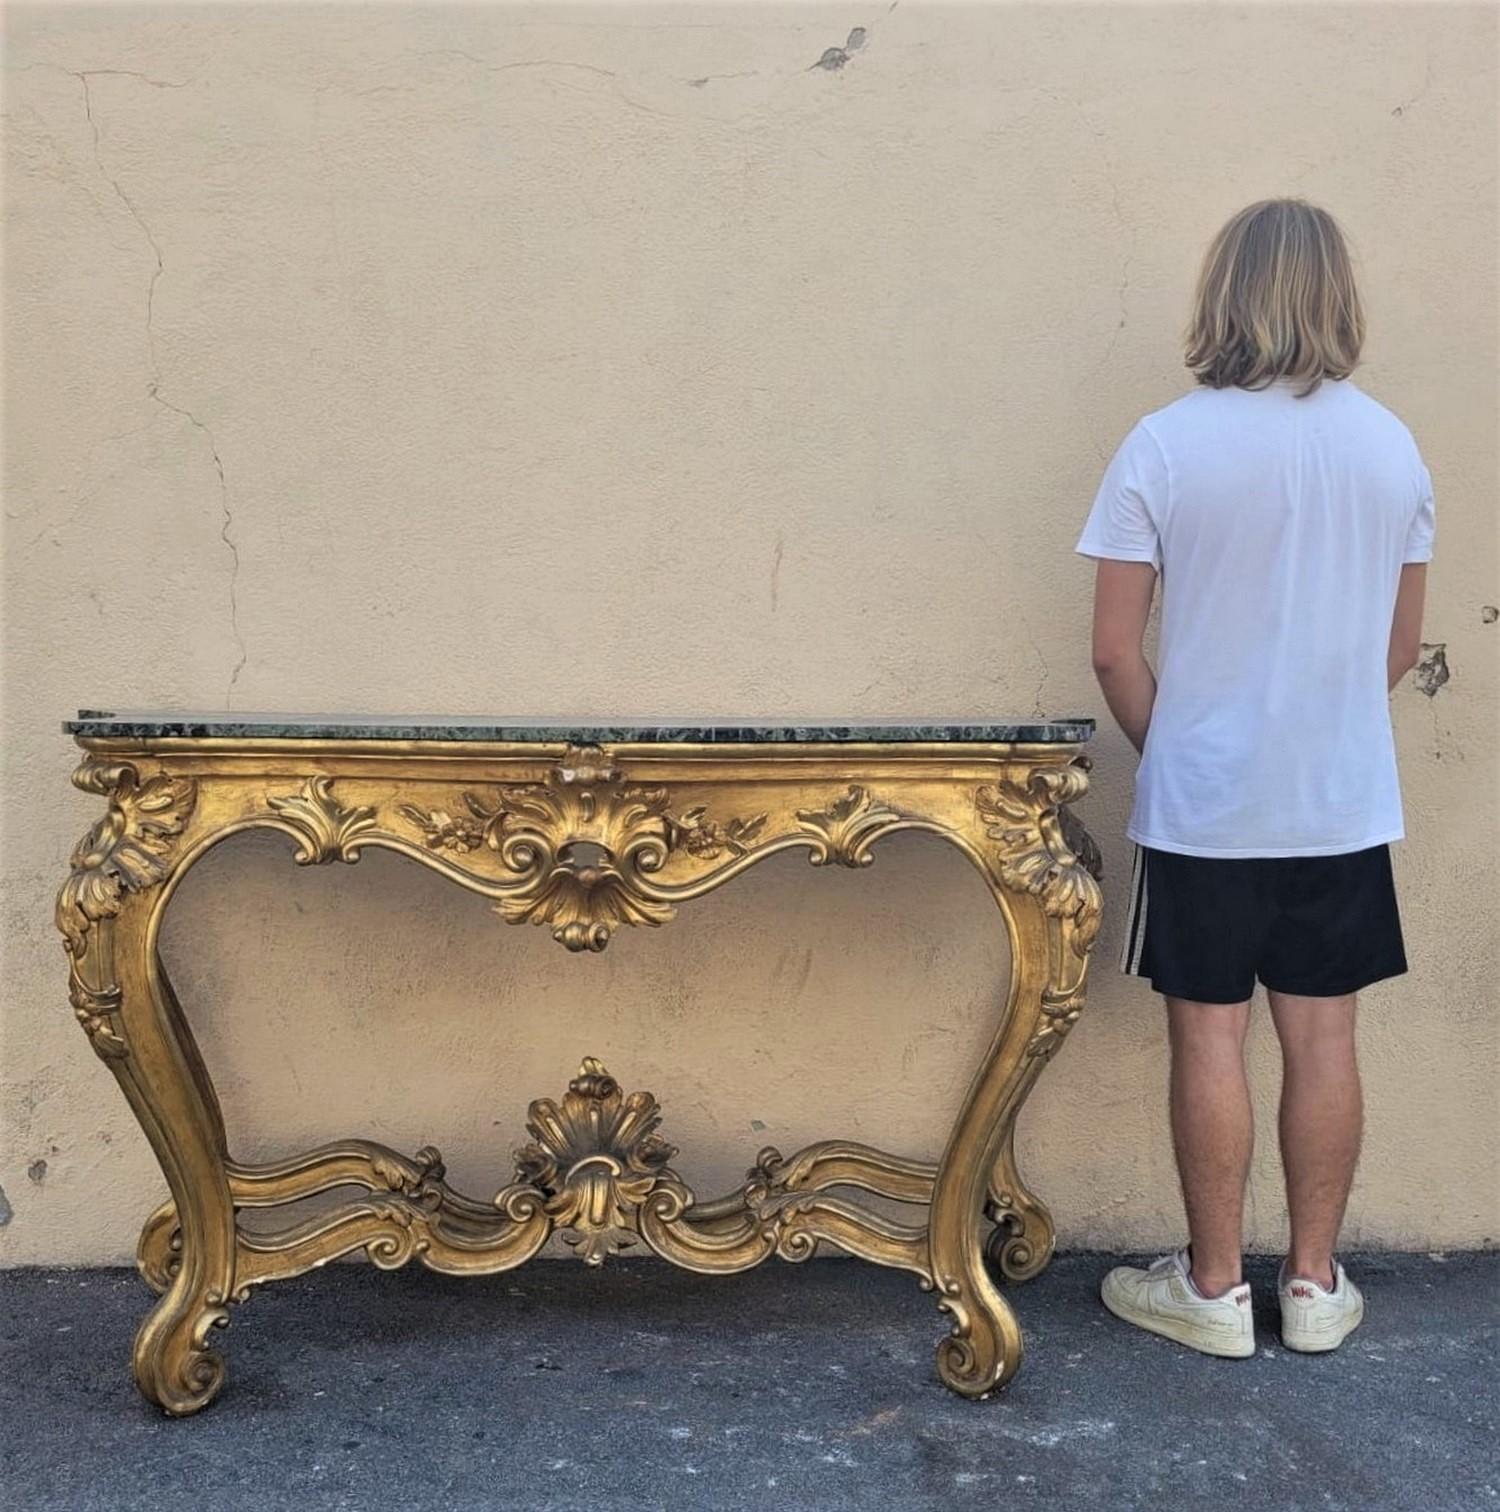 Beautiful console in gilded and carved wood, Louis XV style, surmounted by a green marble top

Good condition, wear to the gilding, restored marble (it was broken in 2)

Period 19th century

Measures: H95cm
163.5 x